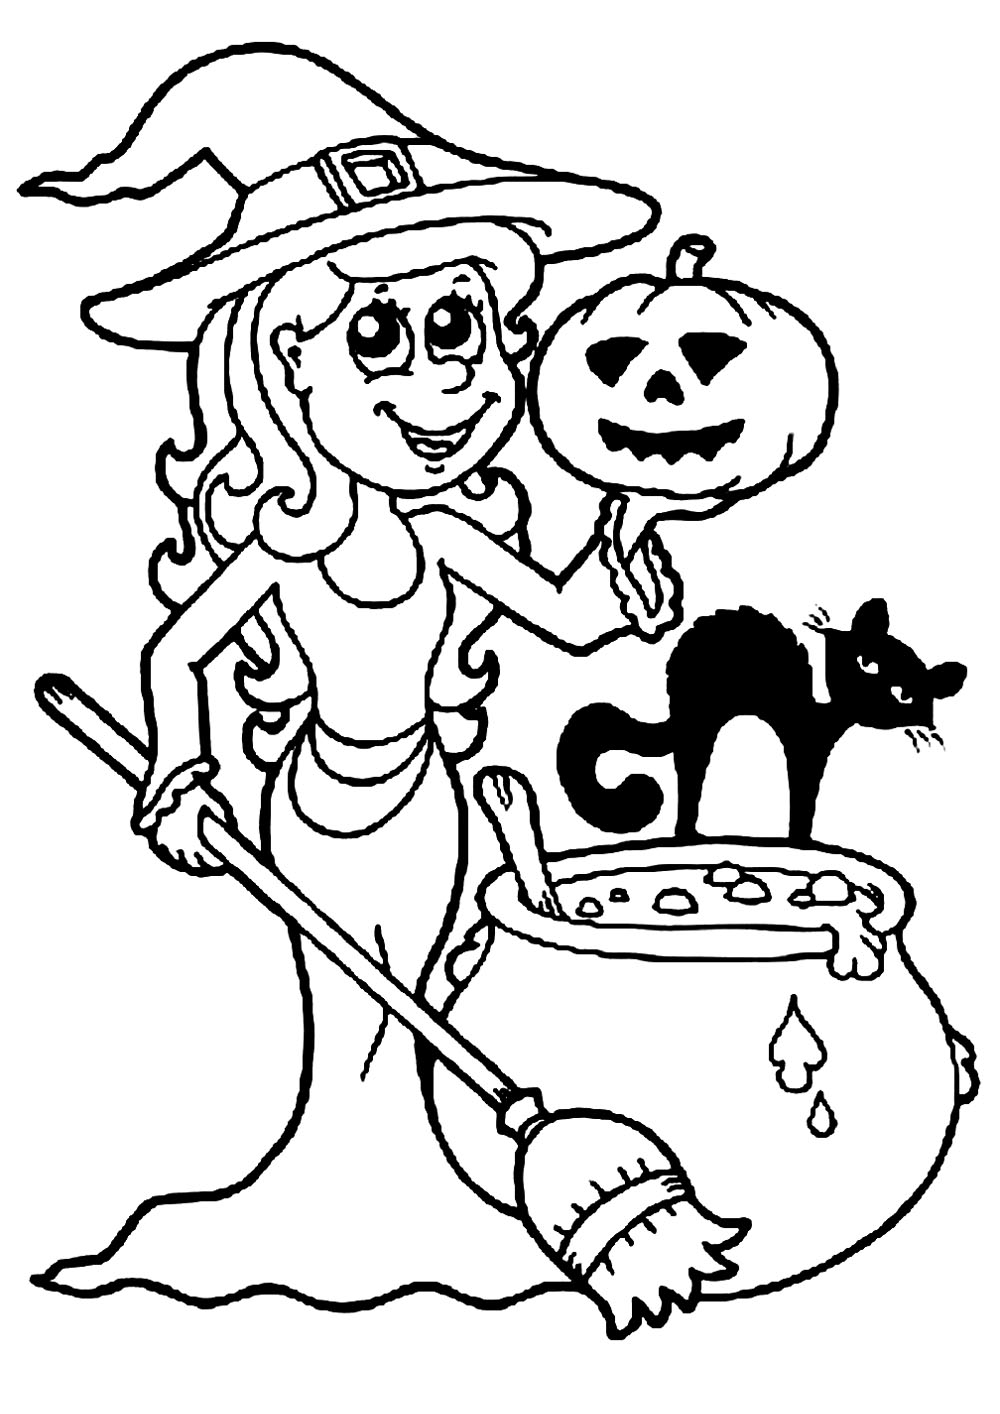 Download Halloween free to color for kids - Halloween Kids Coloring ...